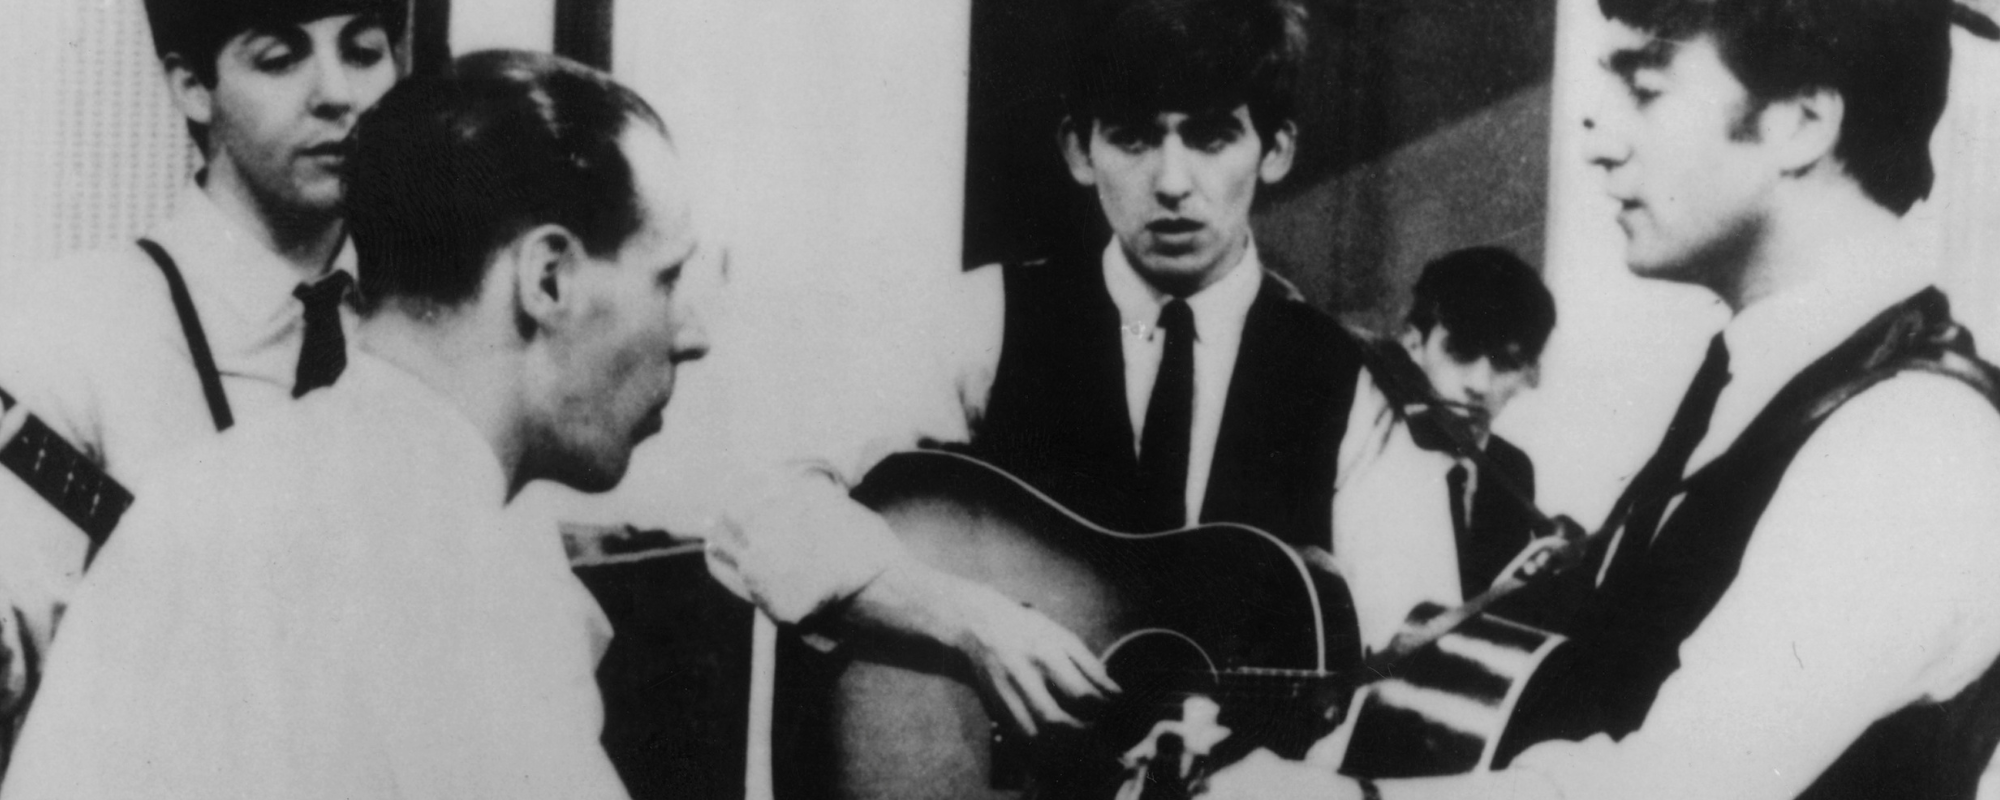 The Beatles Song That Pushed George Martin to the Brink of Exhaustion